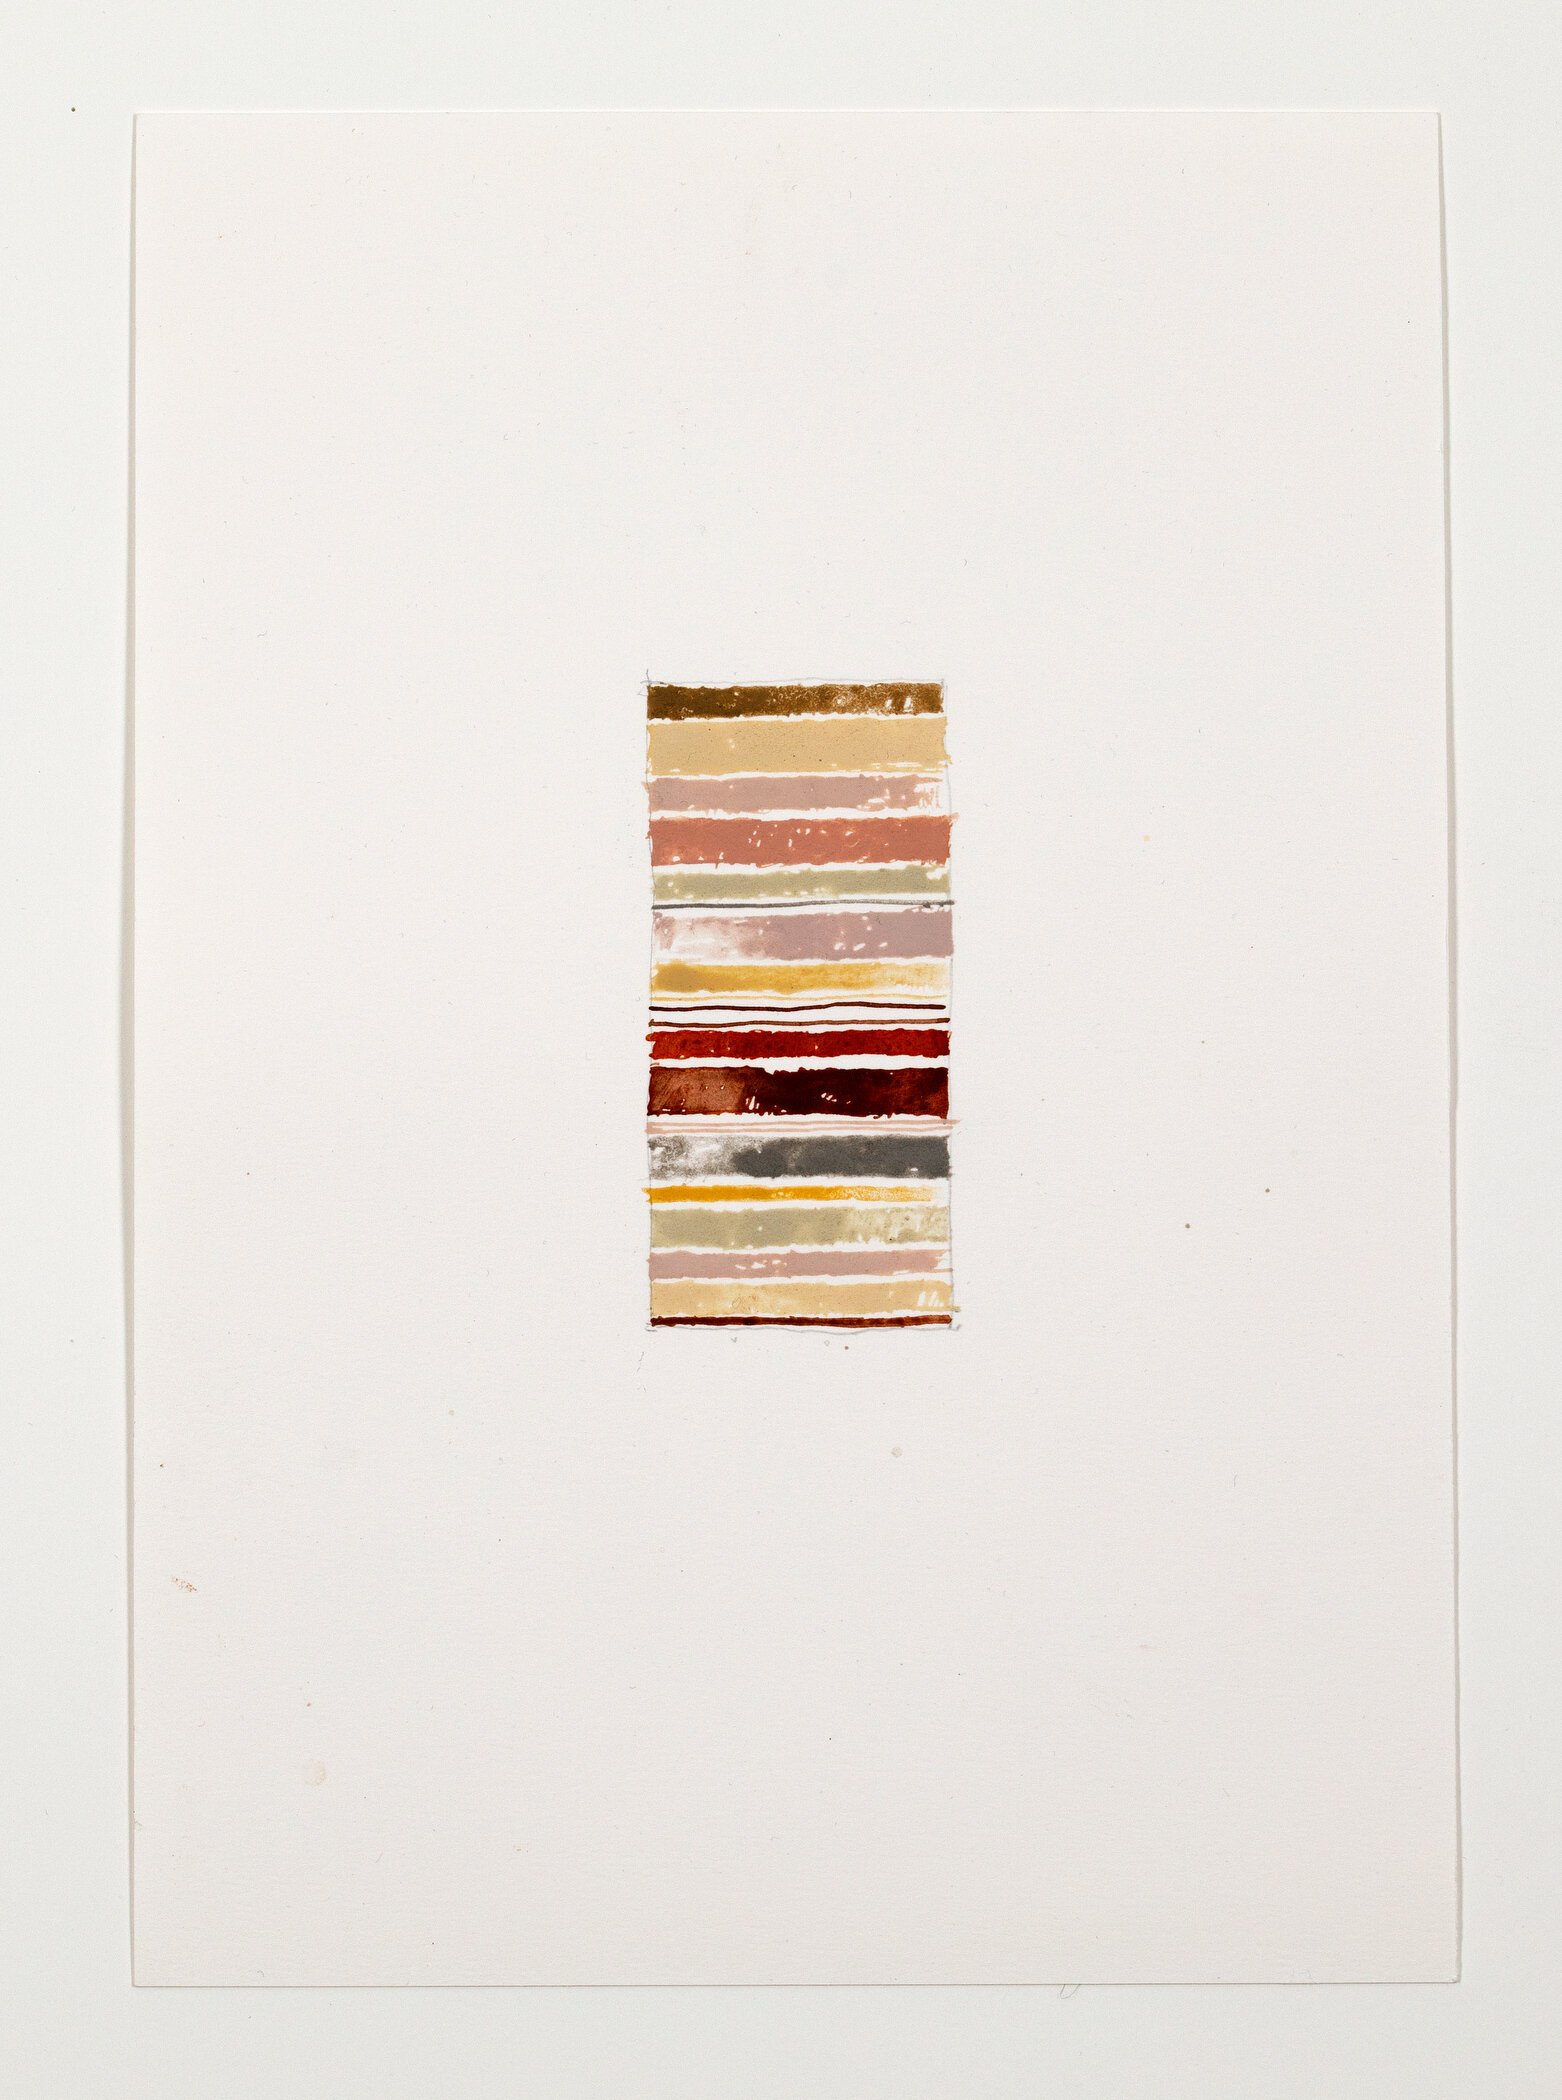  Camille Kersely  Known/unknown - The well  2020 Rock pigment and graphite on 300gsm watercolour paper 30cm x 21cm 